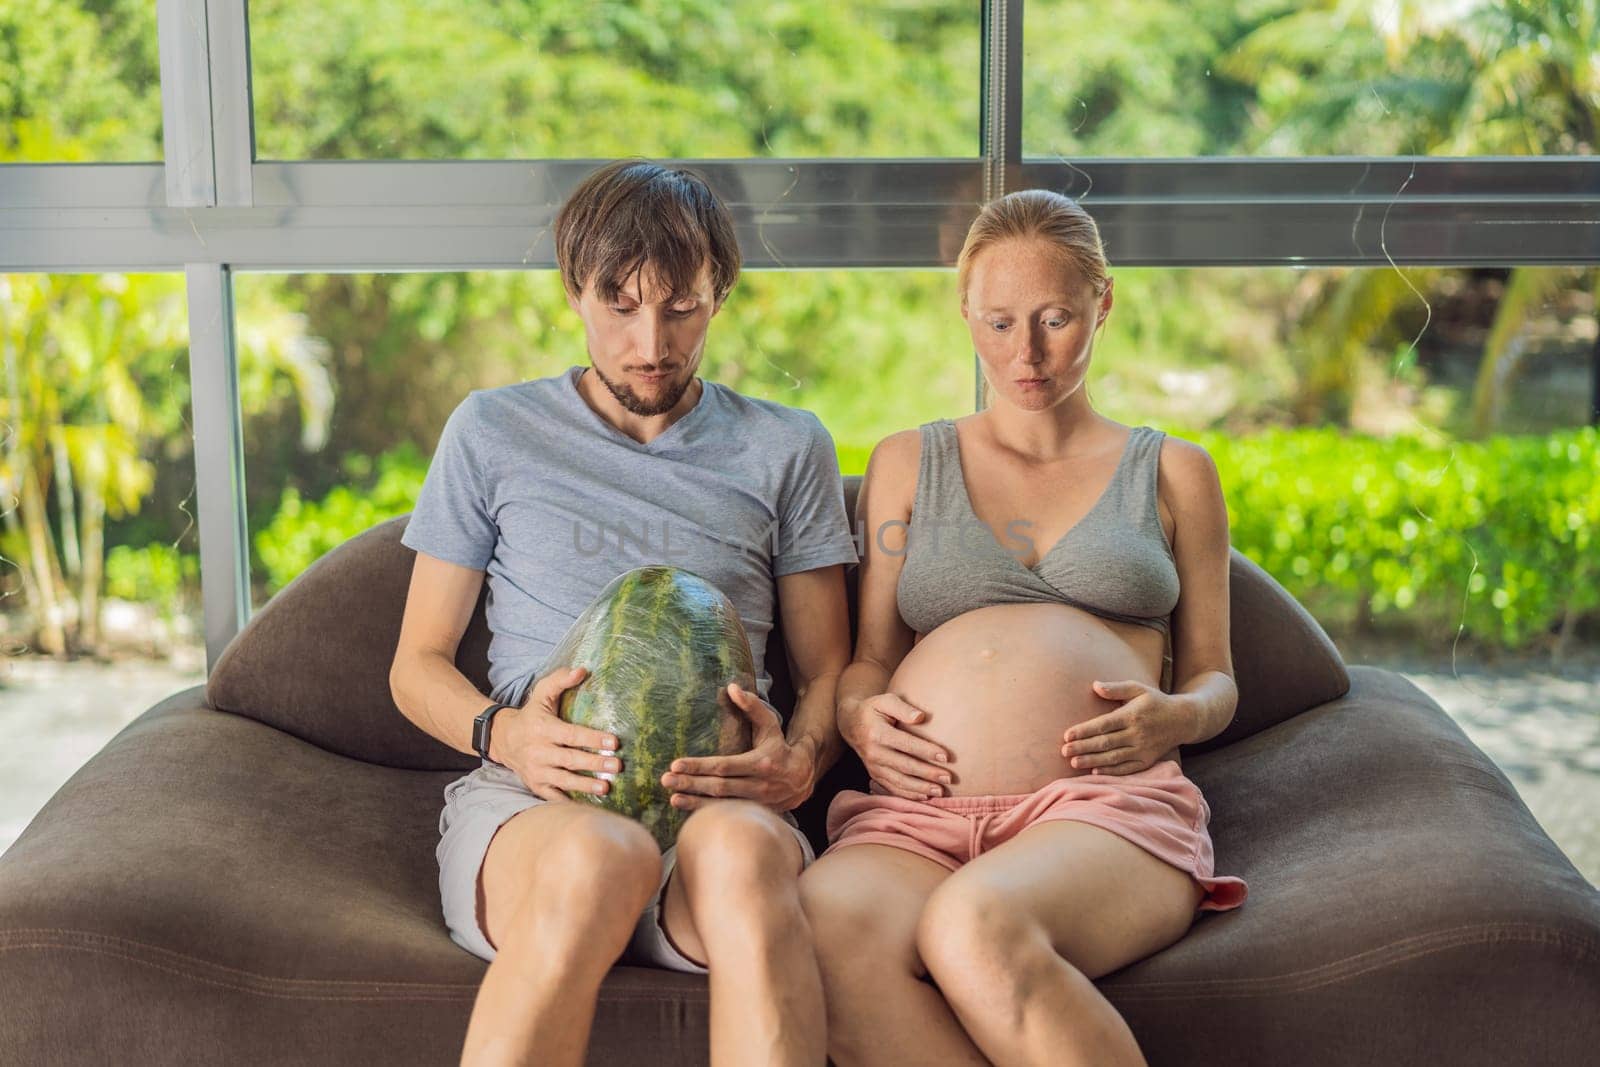 A humorous image: a pregnant woman and her husband playfully use a watermelon in place of a belly, comically highlighting the challenges of navigating with a pregnant bump.